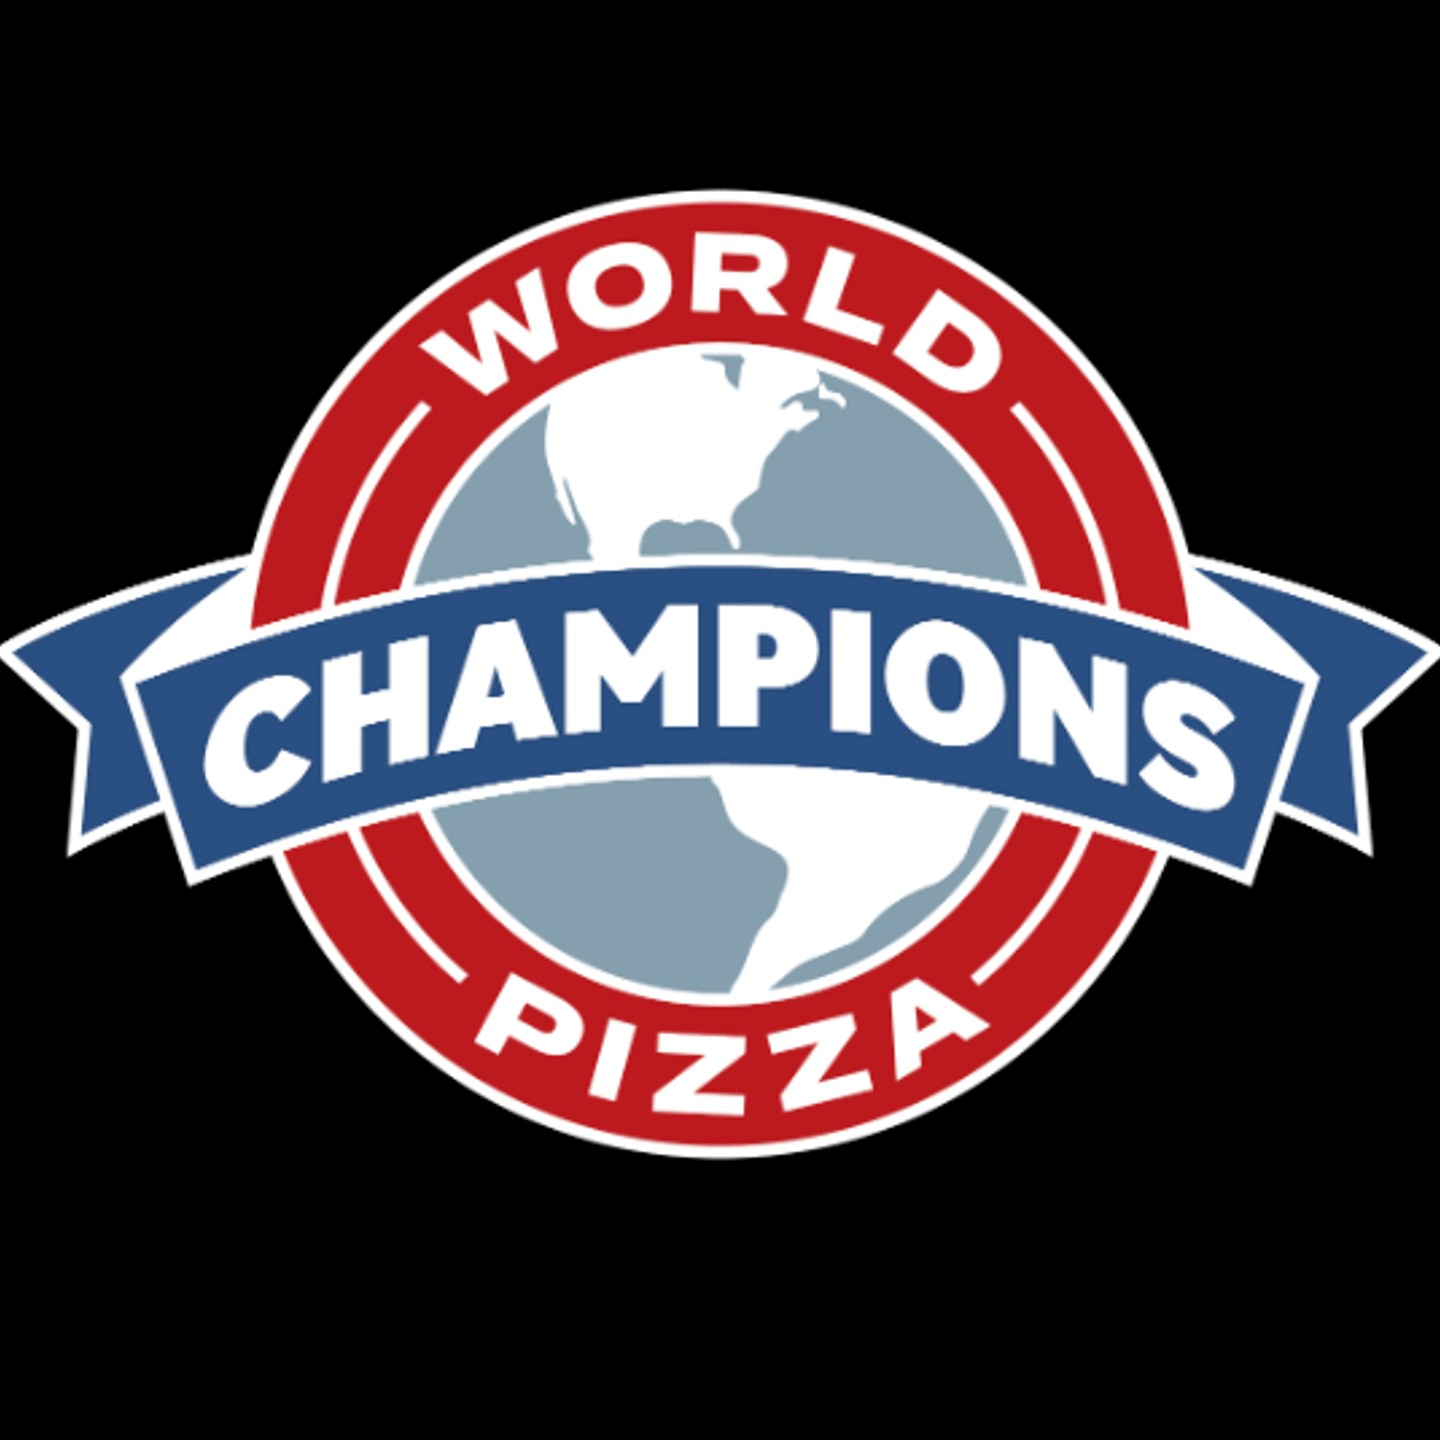 Part of the World Pizza Champions Team!